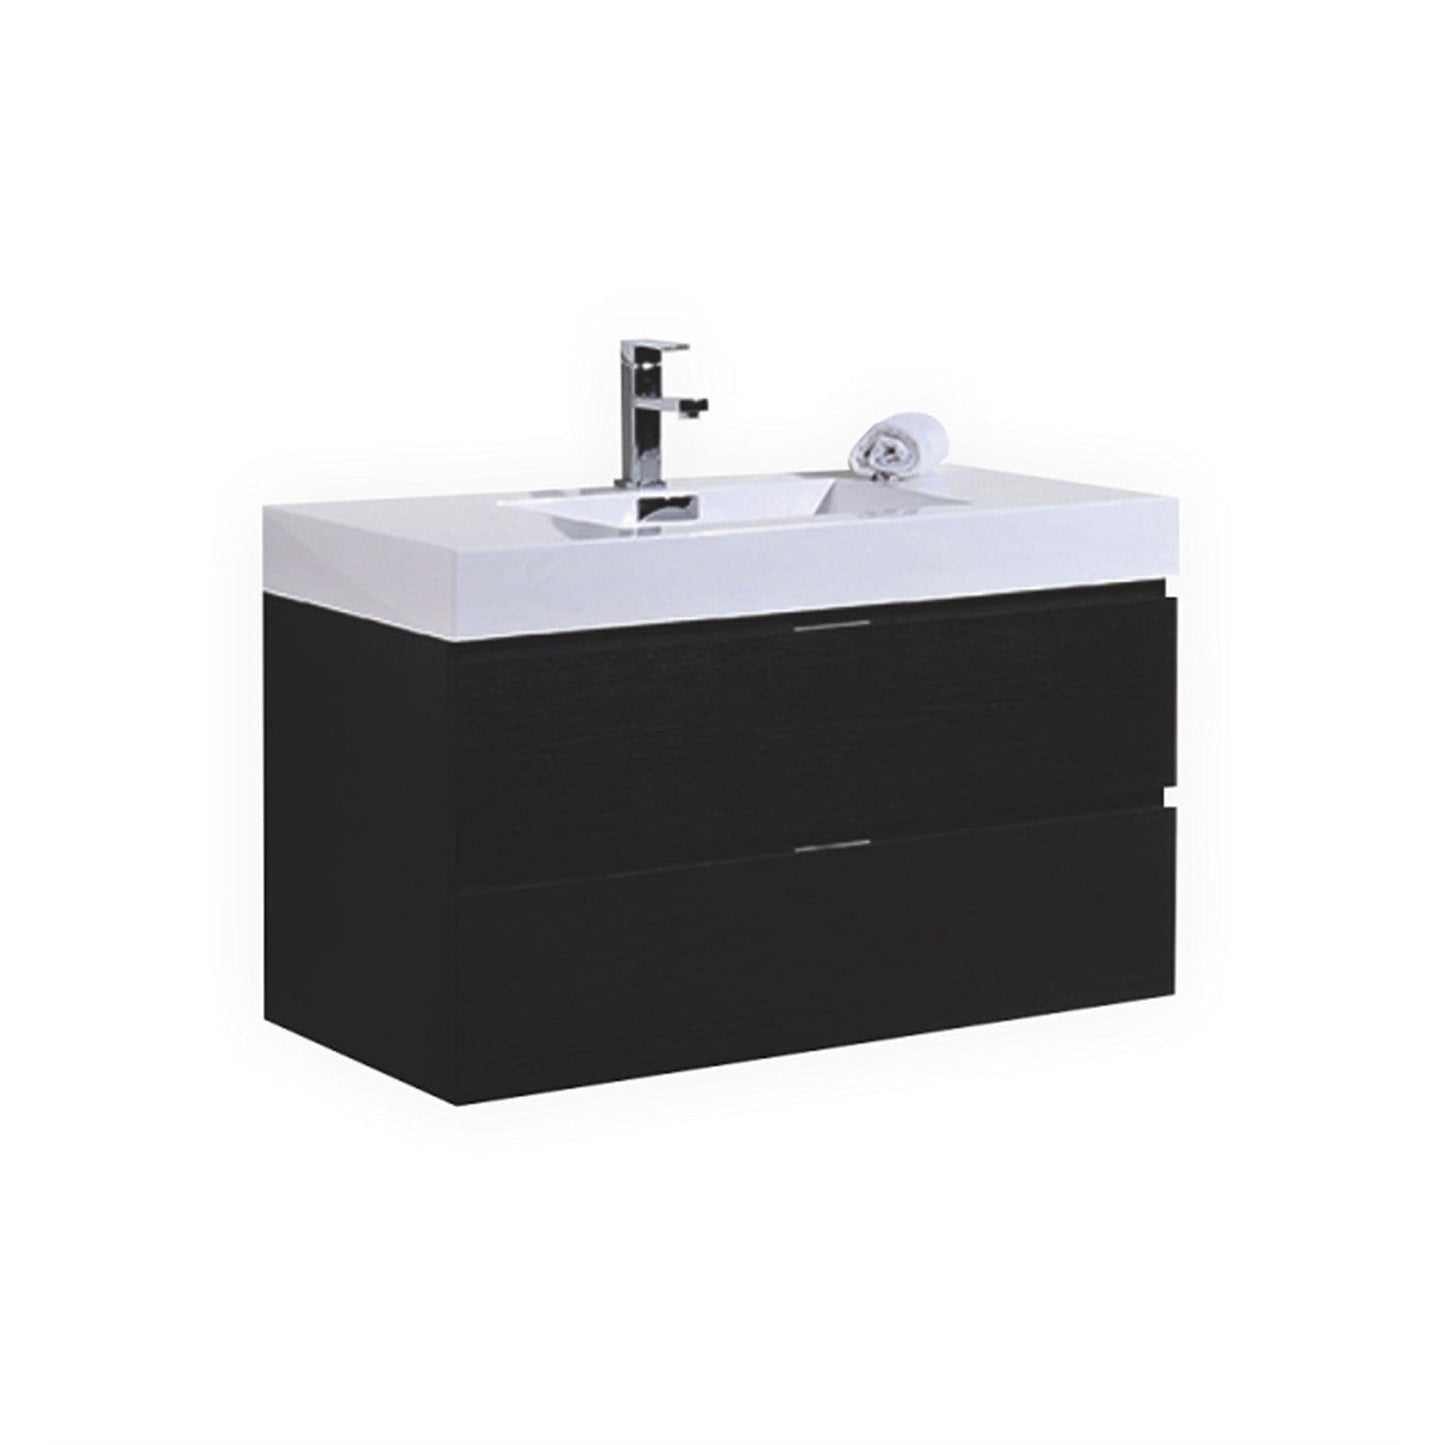 KubeBath Bliss 40" Black Wall-Mounted Modern Bathroom Vanity With Single Integrated Acrylic Sink With Overflow and 38" Black Framed Mirror With Shelf